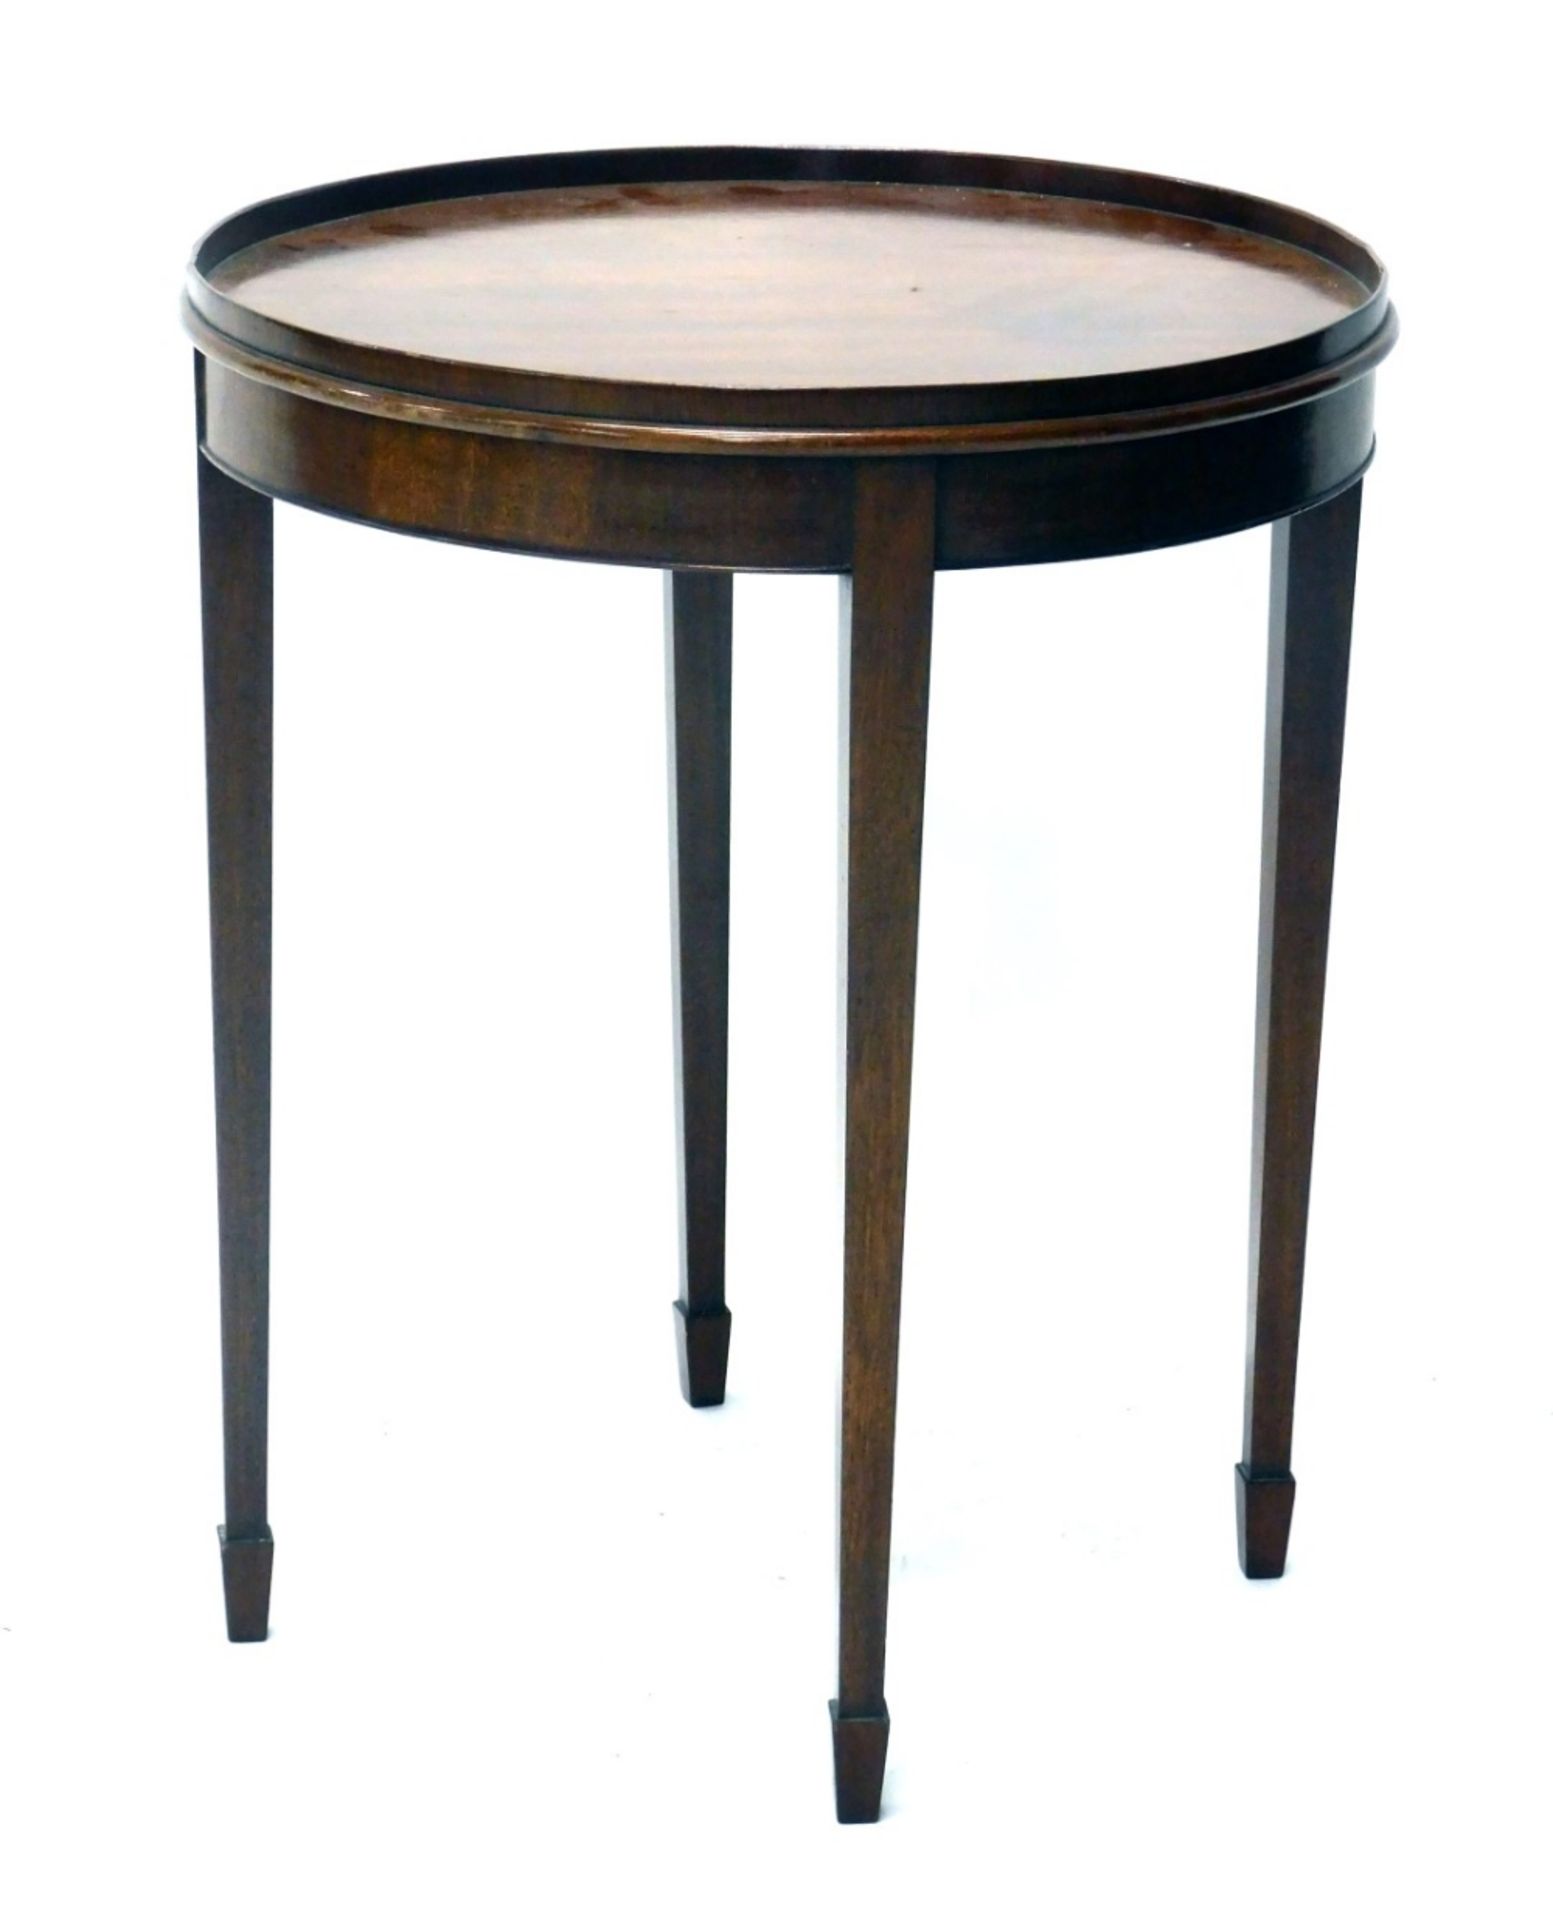 An early 20thC mahogany occasional table, the circular galleried top raised on square tapering legs